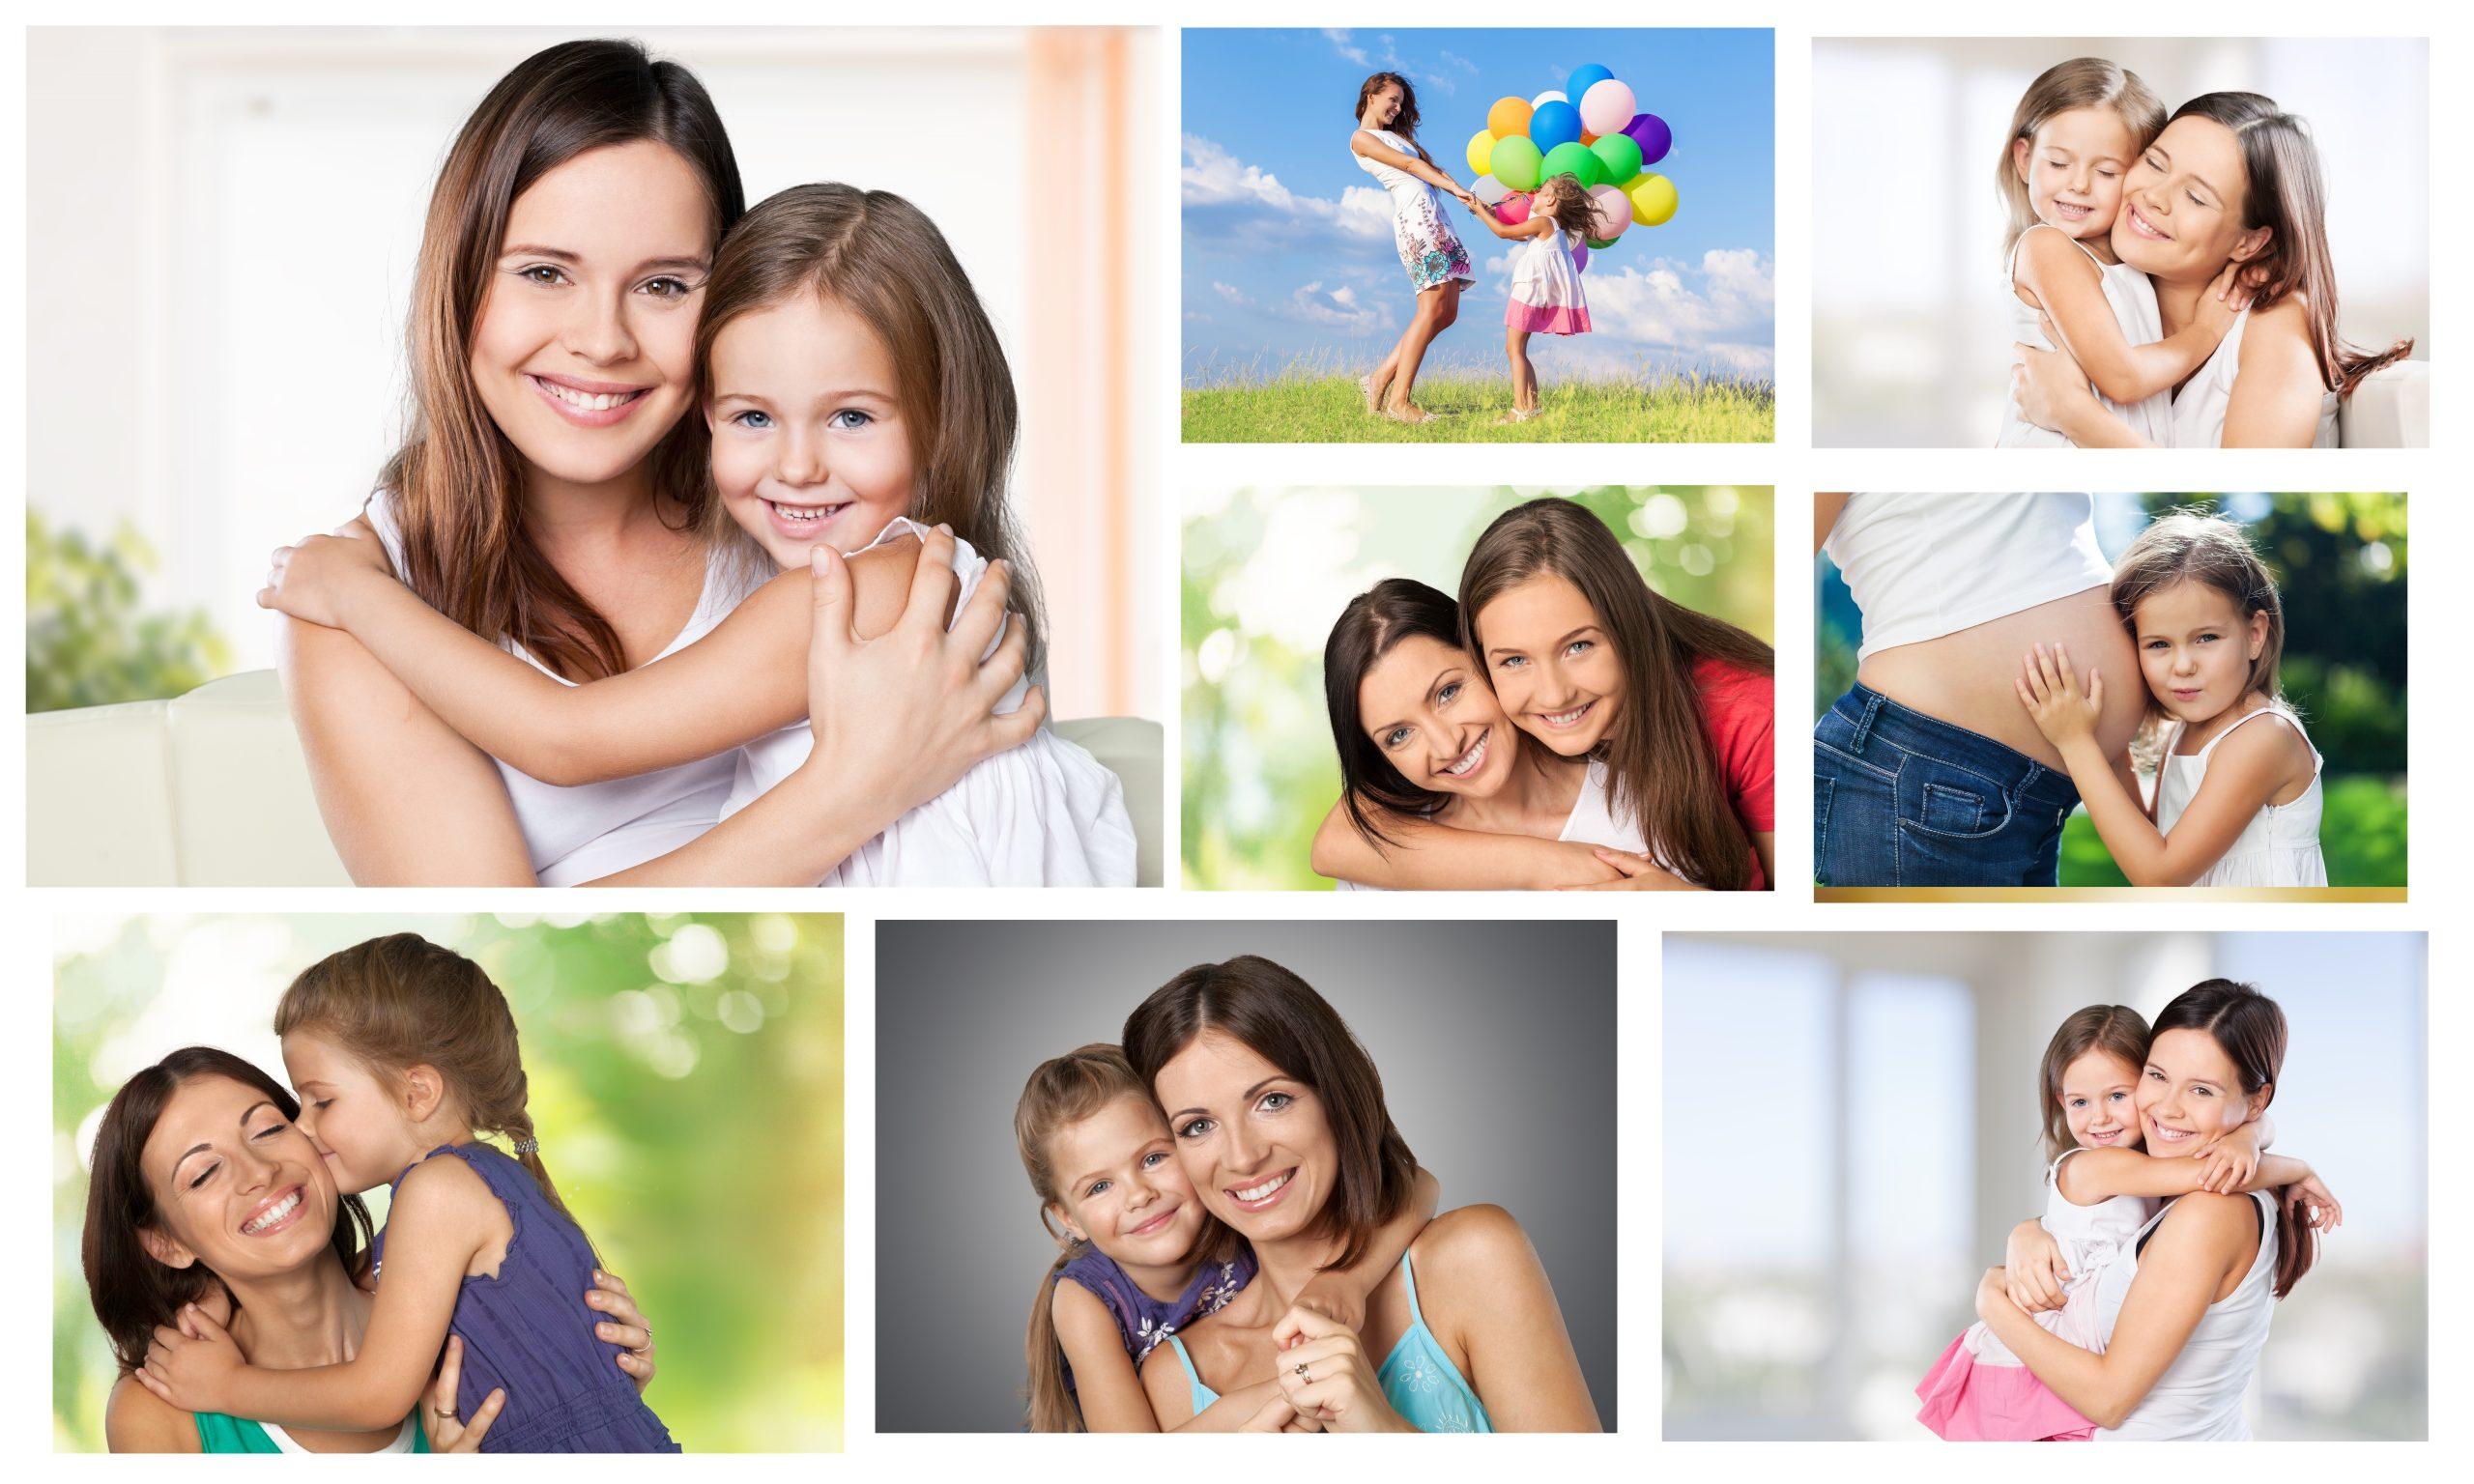 Benefits of Using an Online Collage Maker